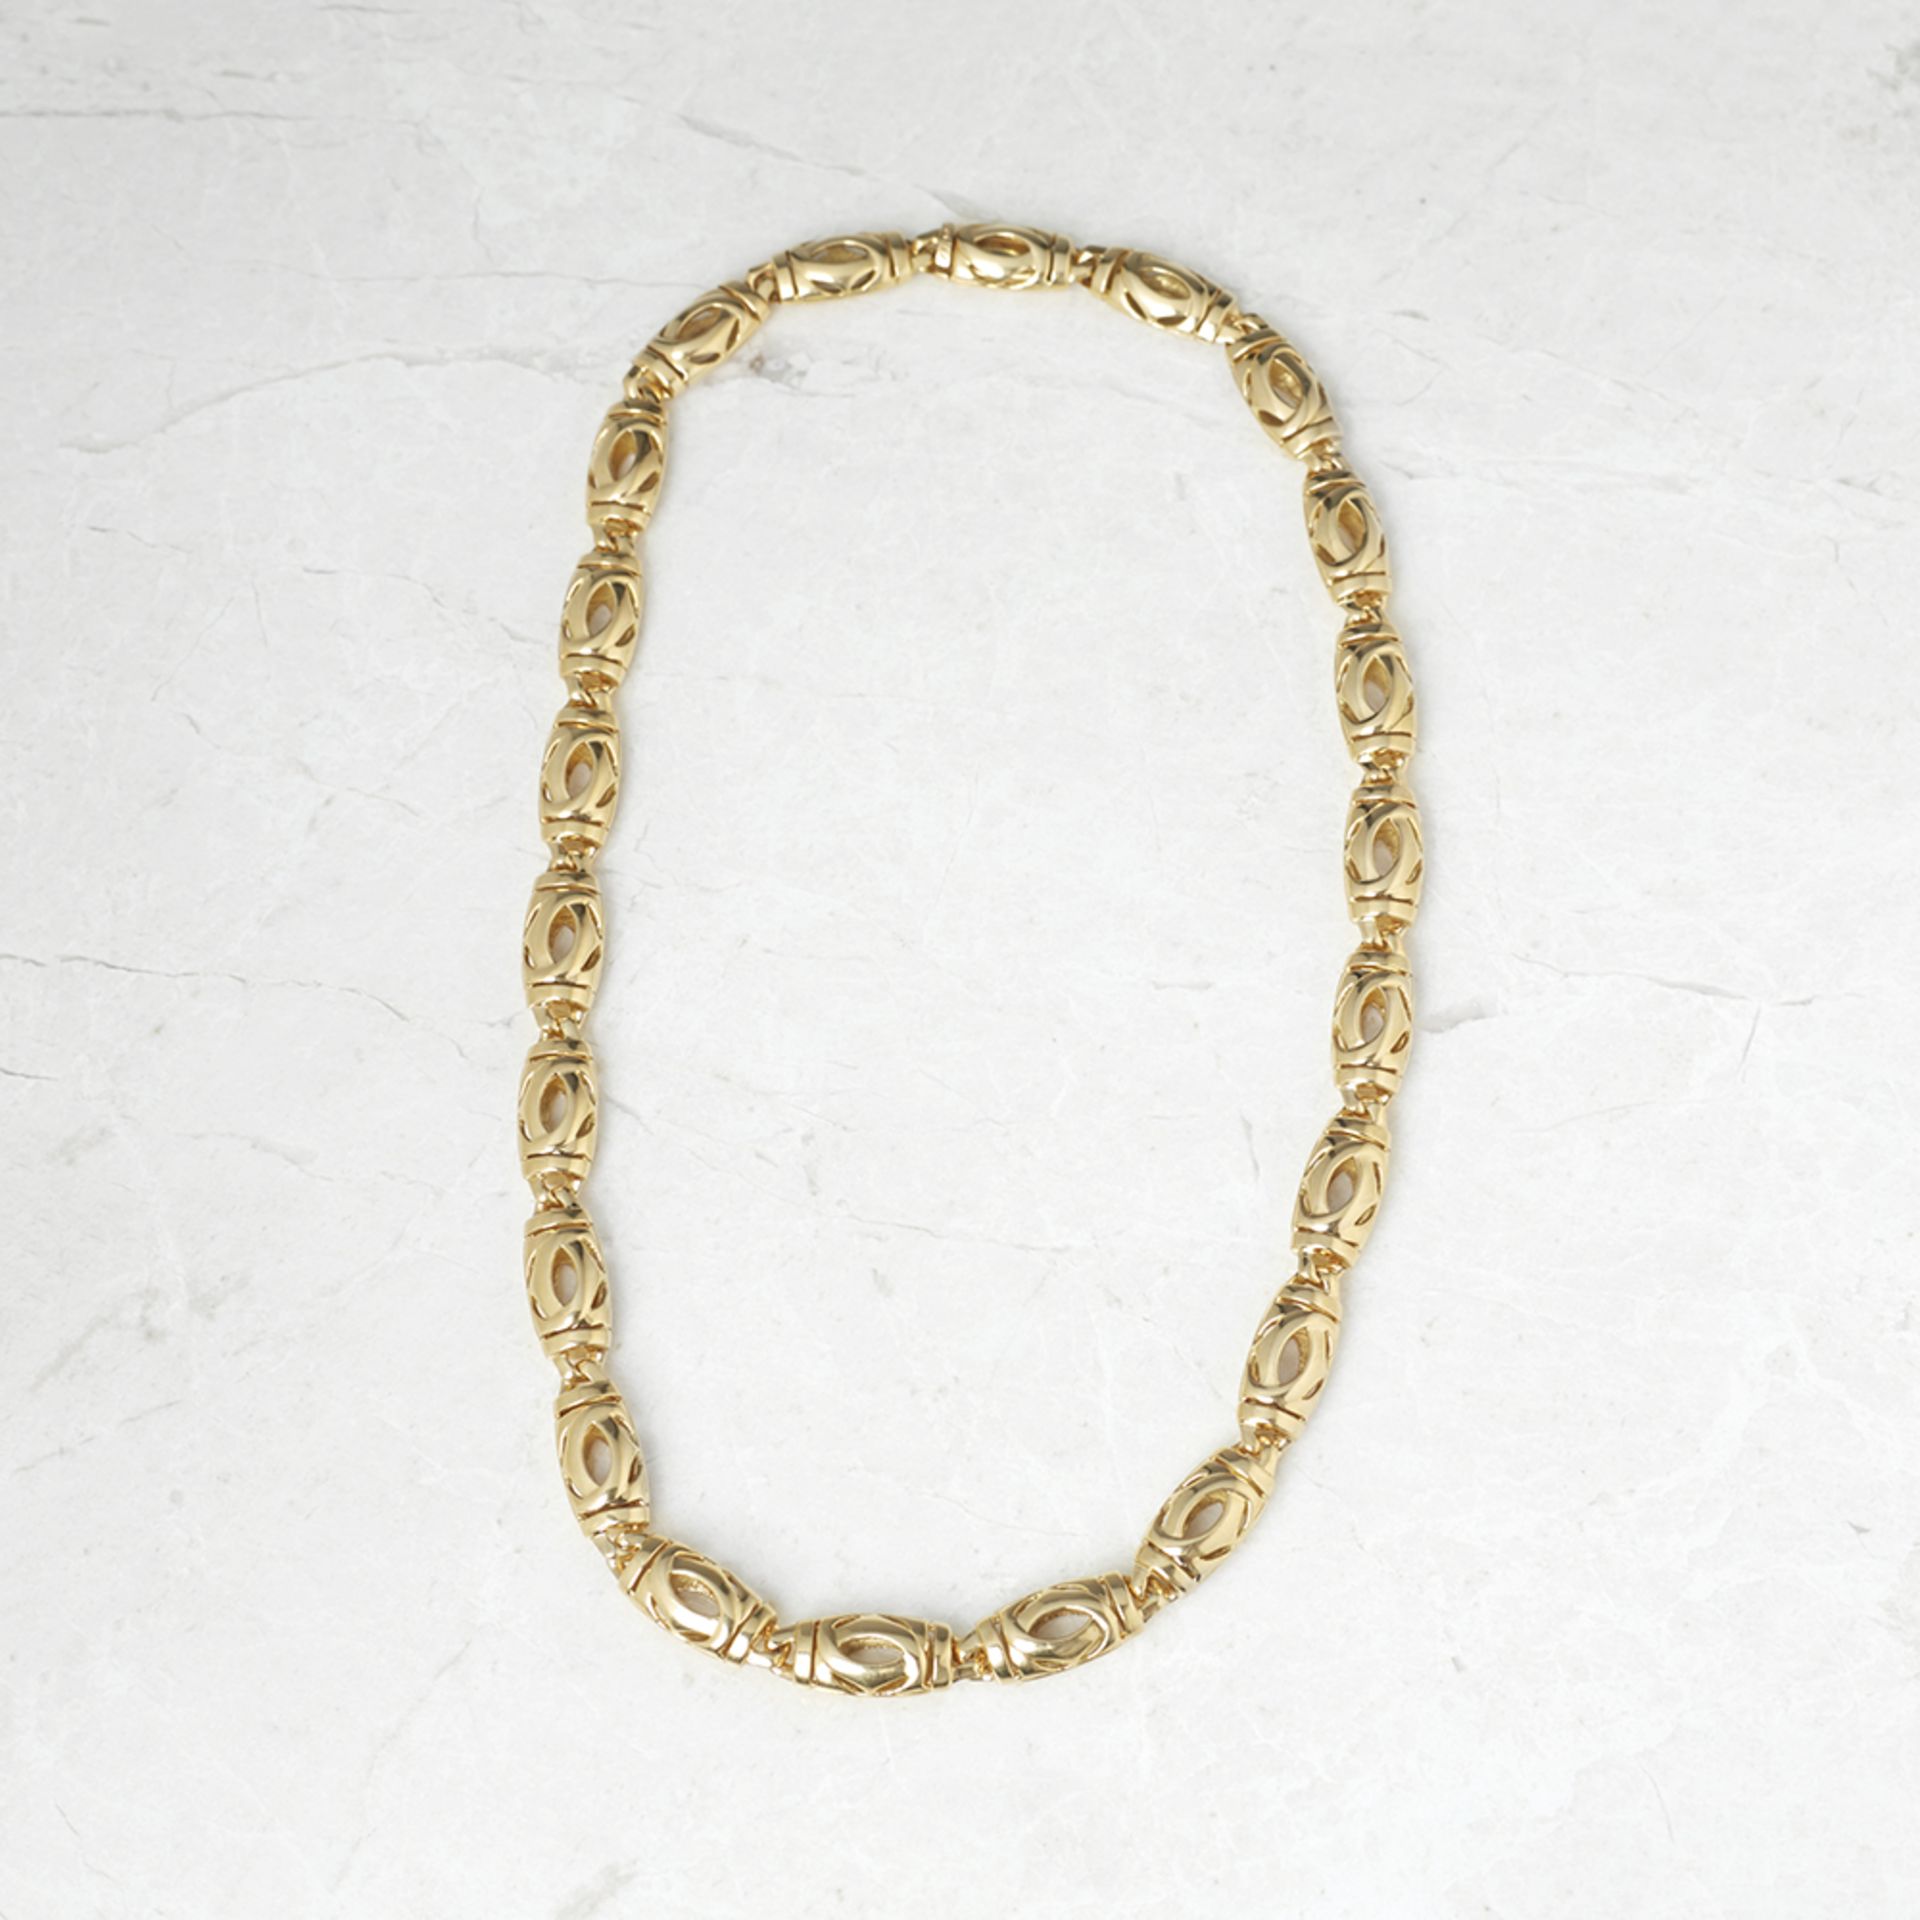 Cartier 18k Yellow Gold Double C Design Necklace - Image 6 of 6